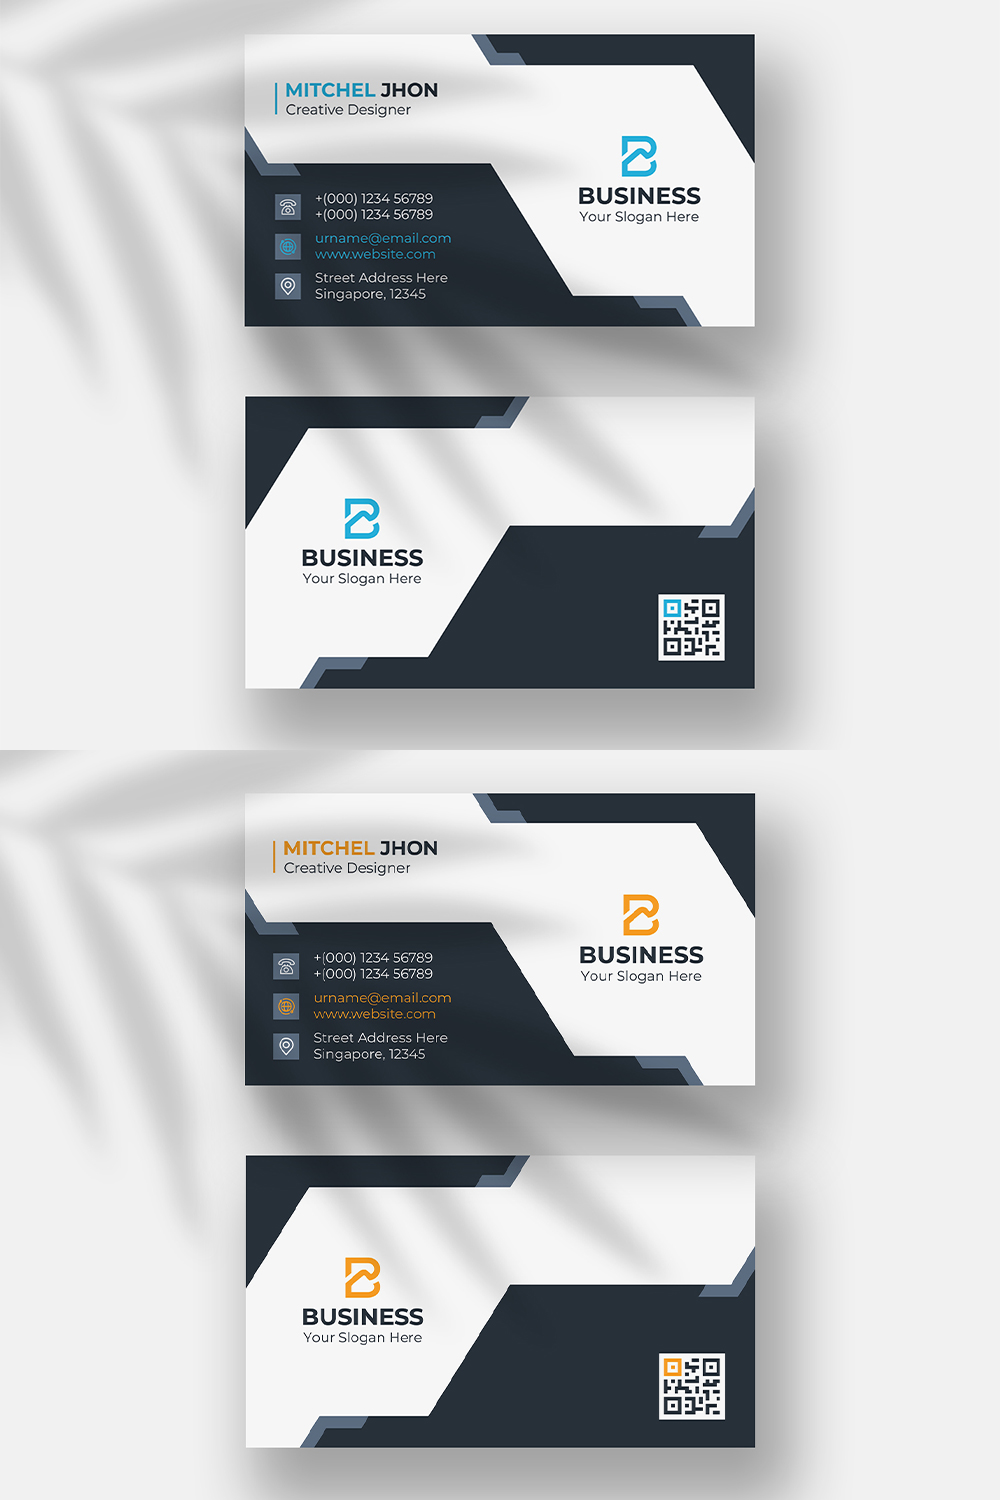 Black and white business cards design.